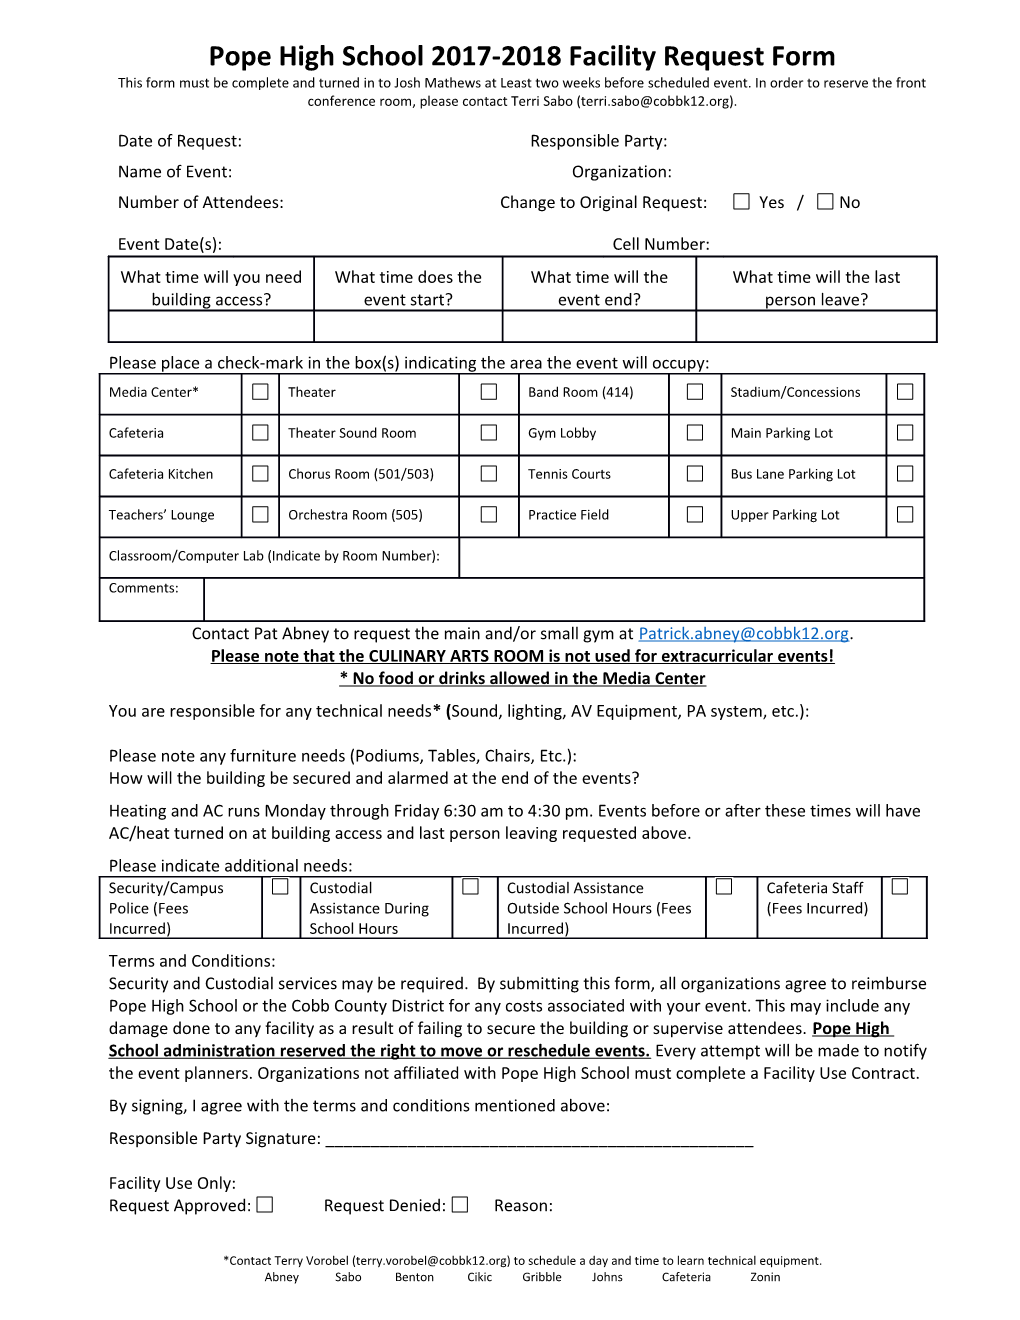 Pope High School 2017-2018 Facility Request Form